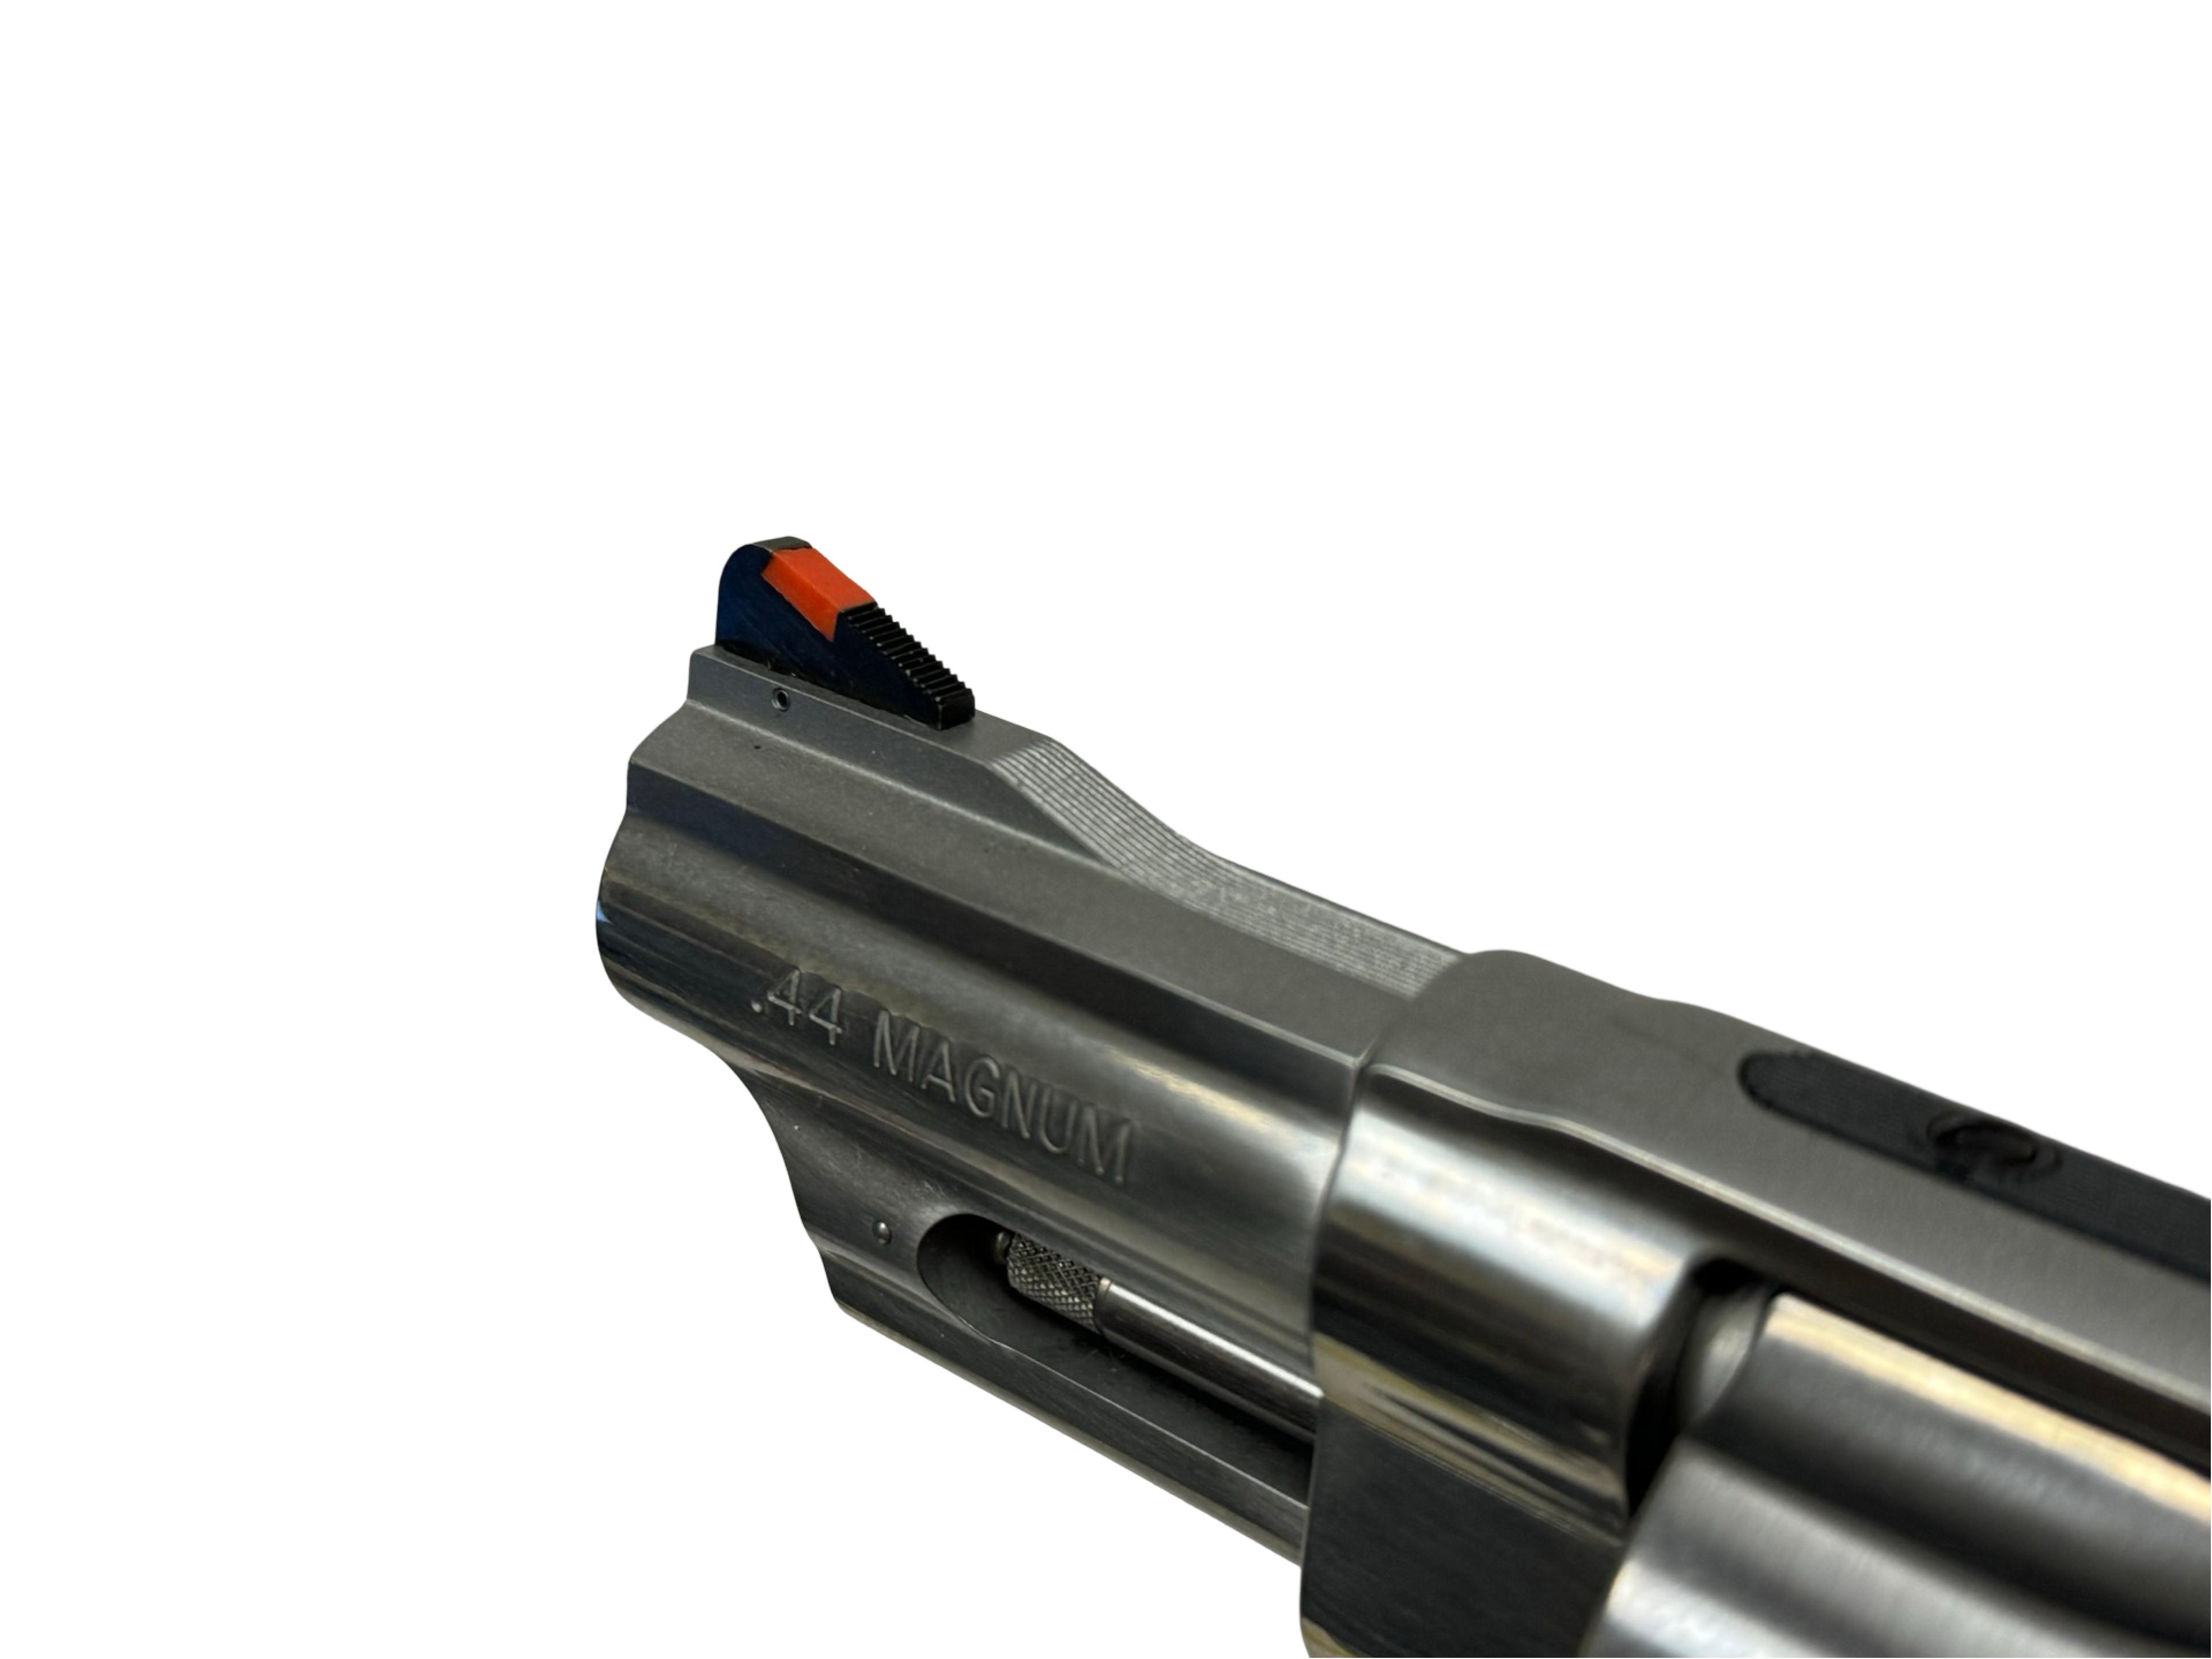 Excellent Smith & Wesson Model 629-6 Performance Center 3" .44 MAGNUM Stainless Revolver in Bag